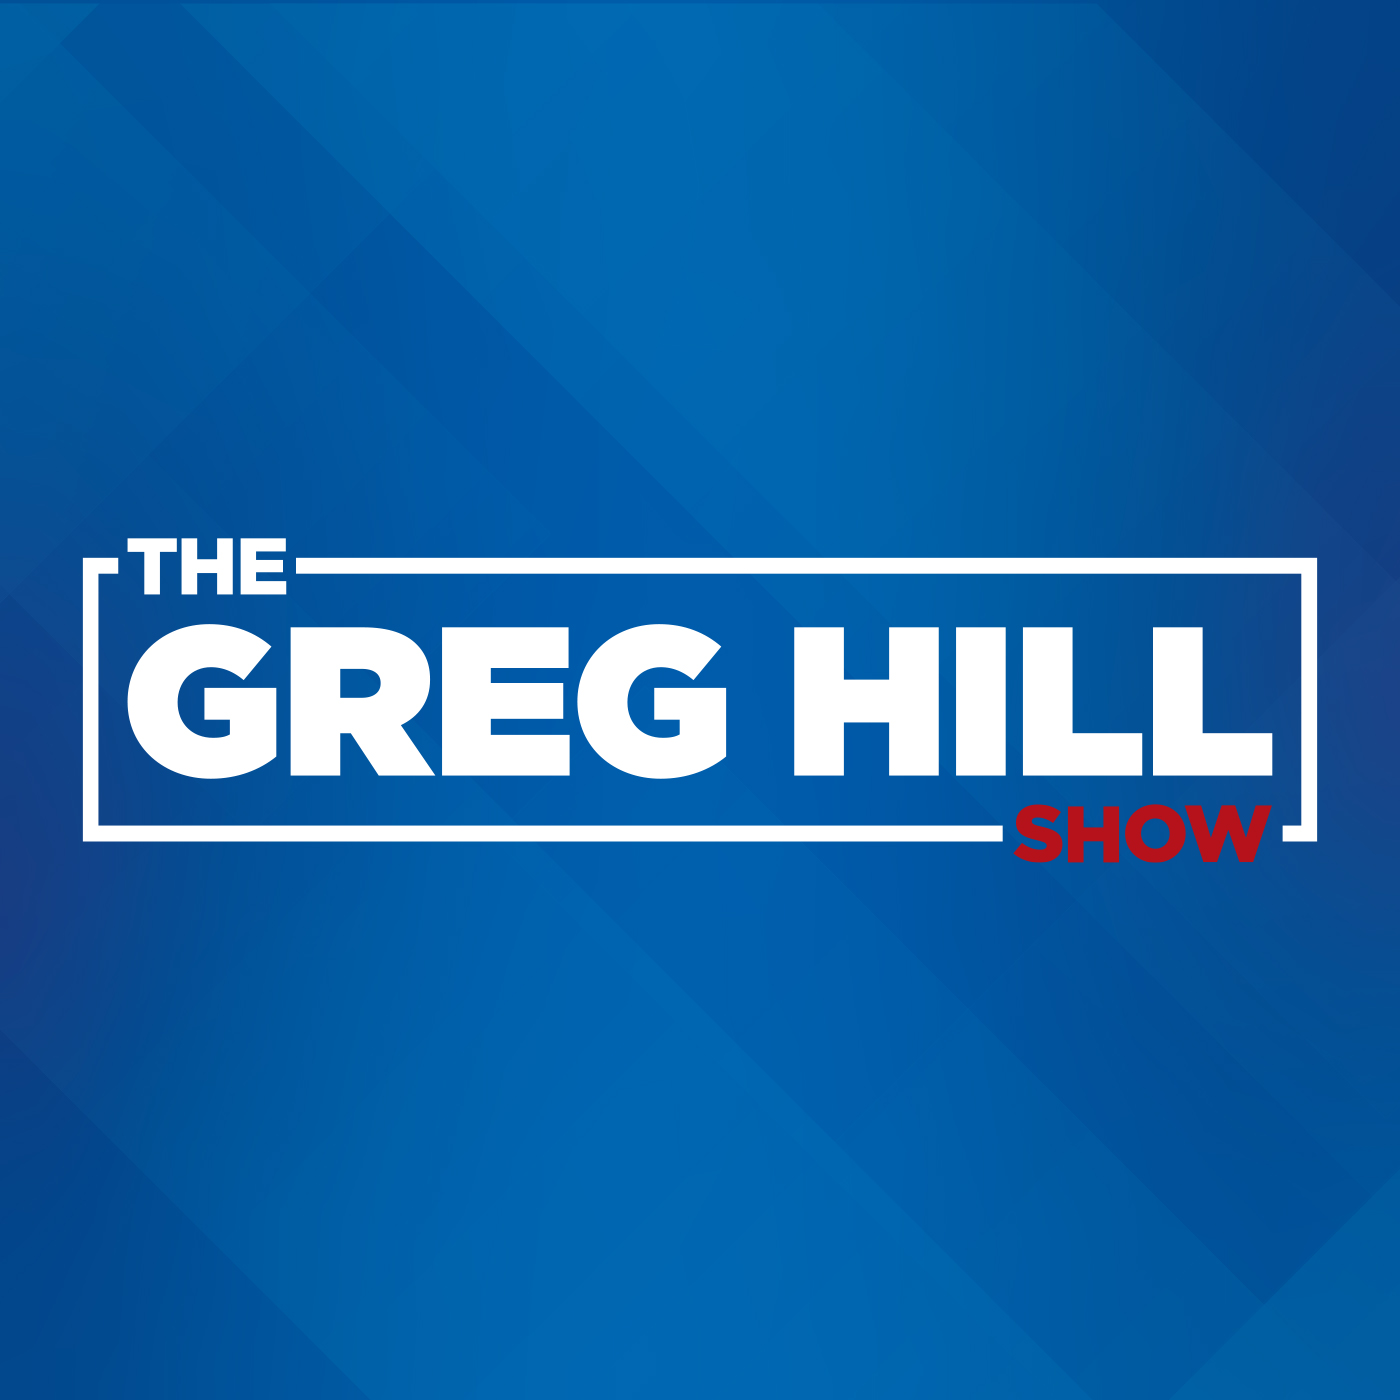 The Best of Boston, according to the Greg-less Greg Hill Show